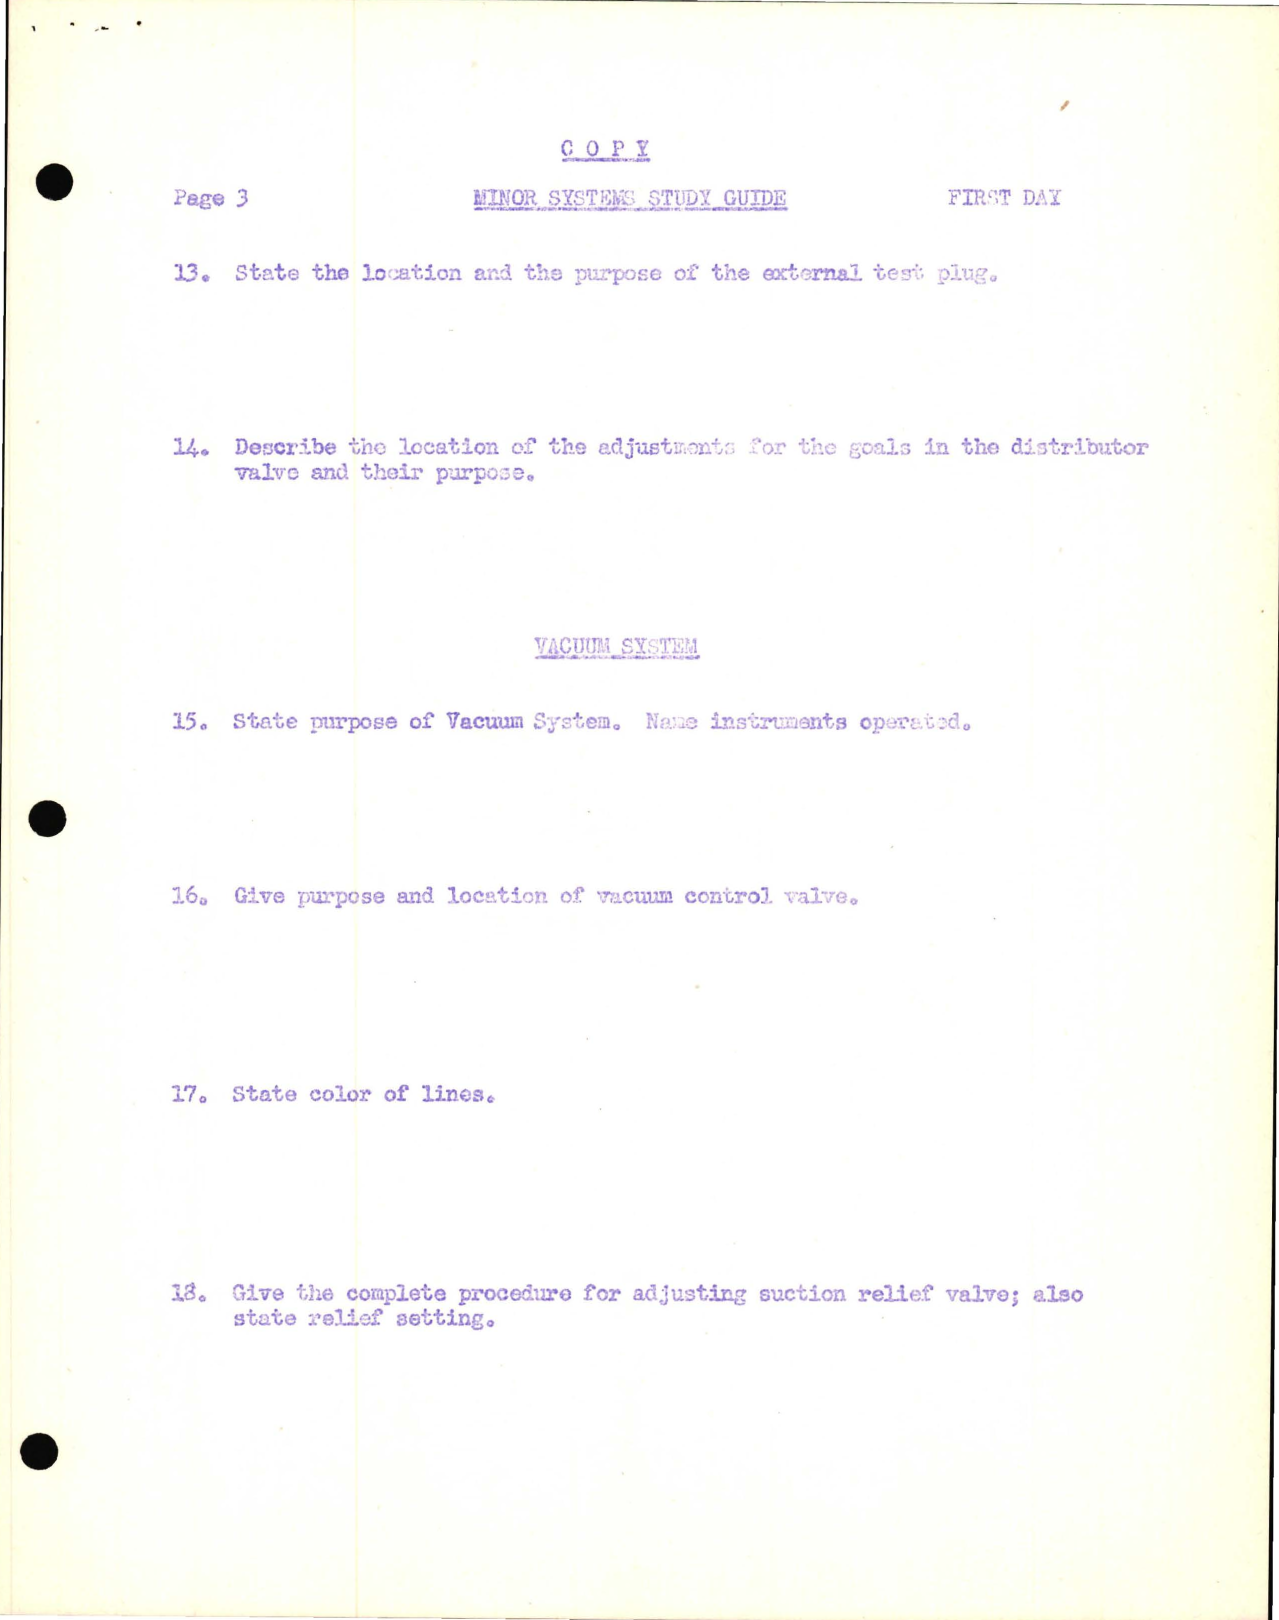 Sample page 5 from AirCorps Library document: Study Guide for Minor Systems - Consolidated Aircraft, First Phase